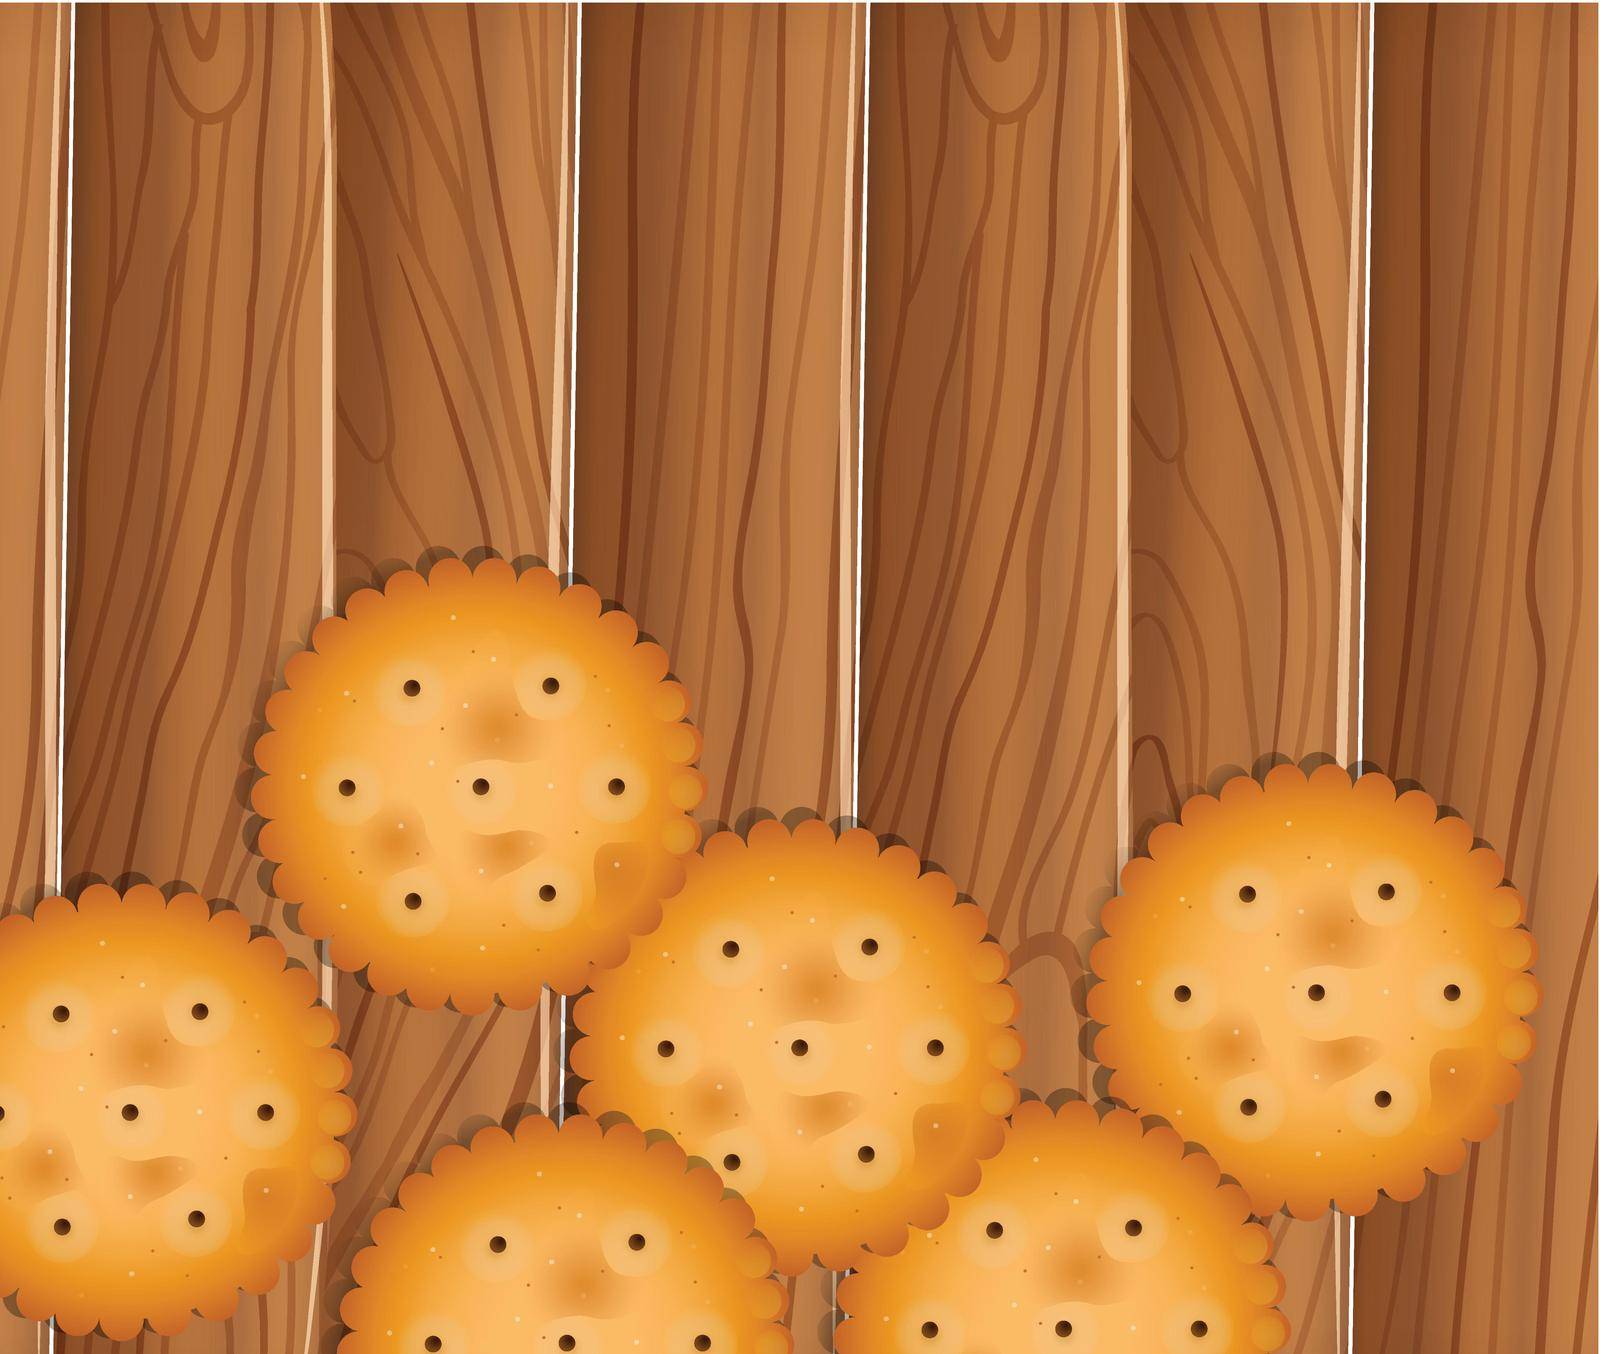 Illustration of the delectable biscuits